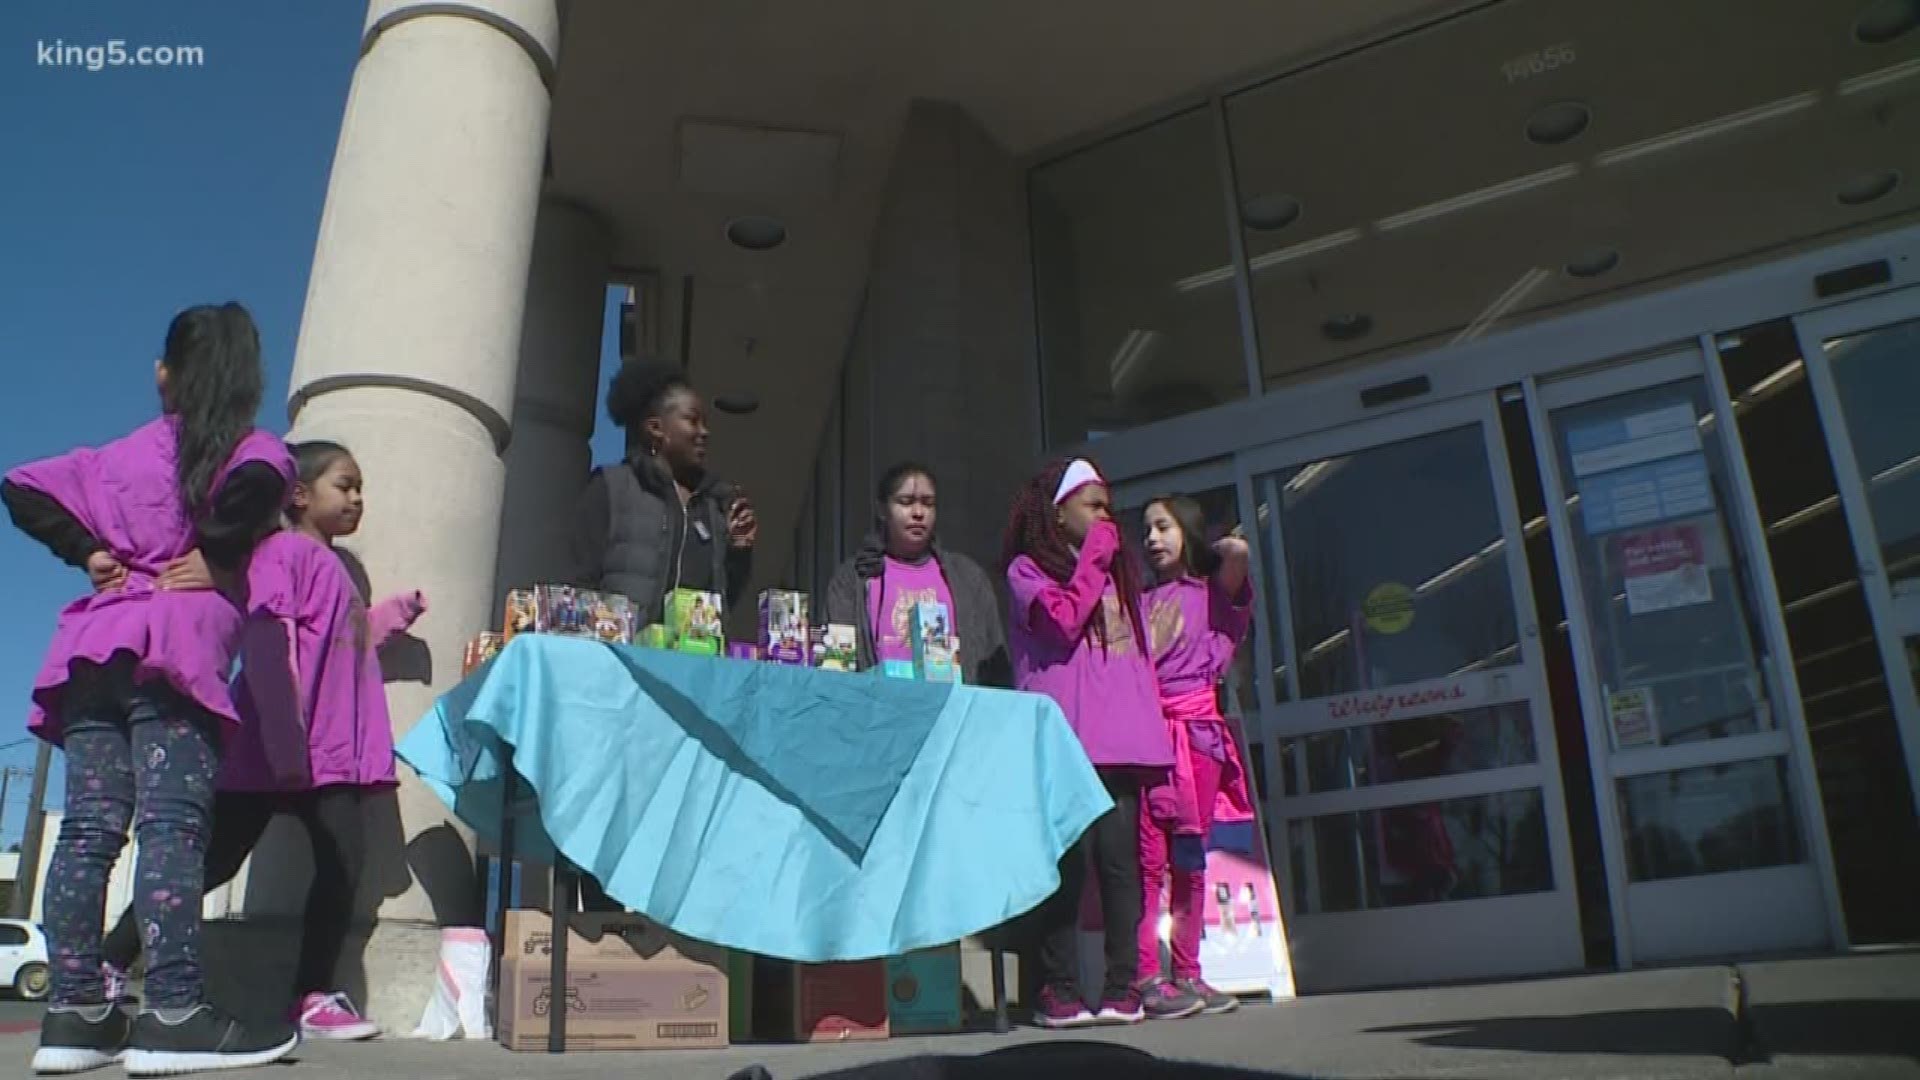 One troop in Burien is on an ambitious mission to sells lots of boxes. KING 5's Vanessa Misciagna explains, their goals stretch far beyond cookie sales.